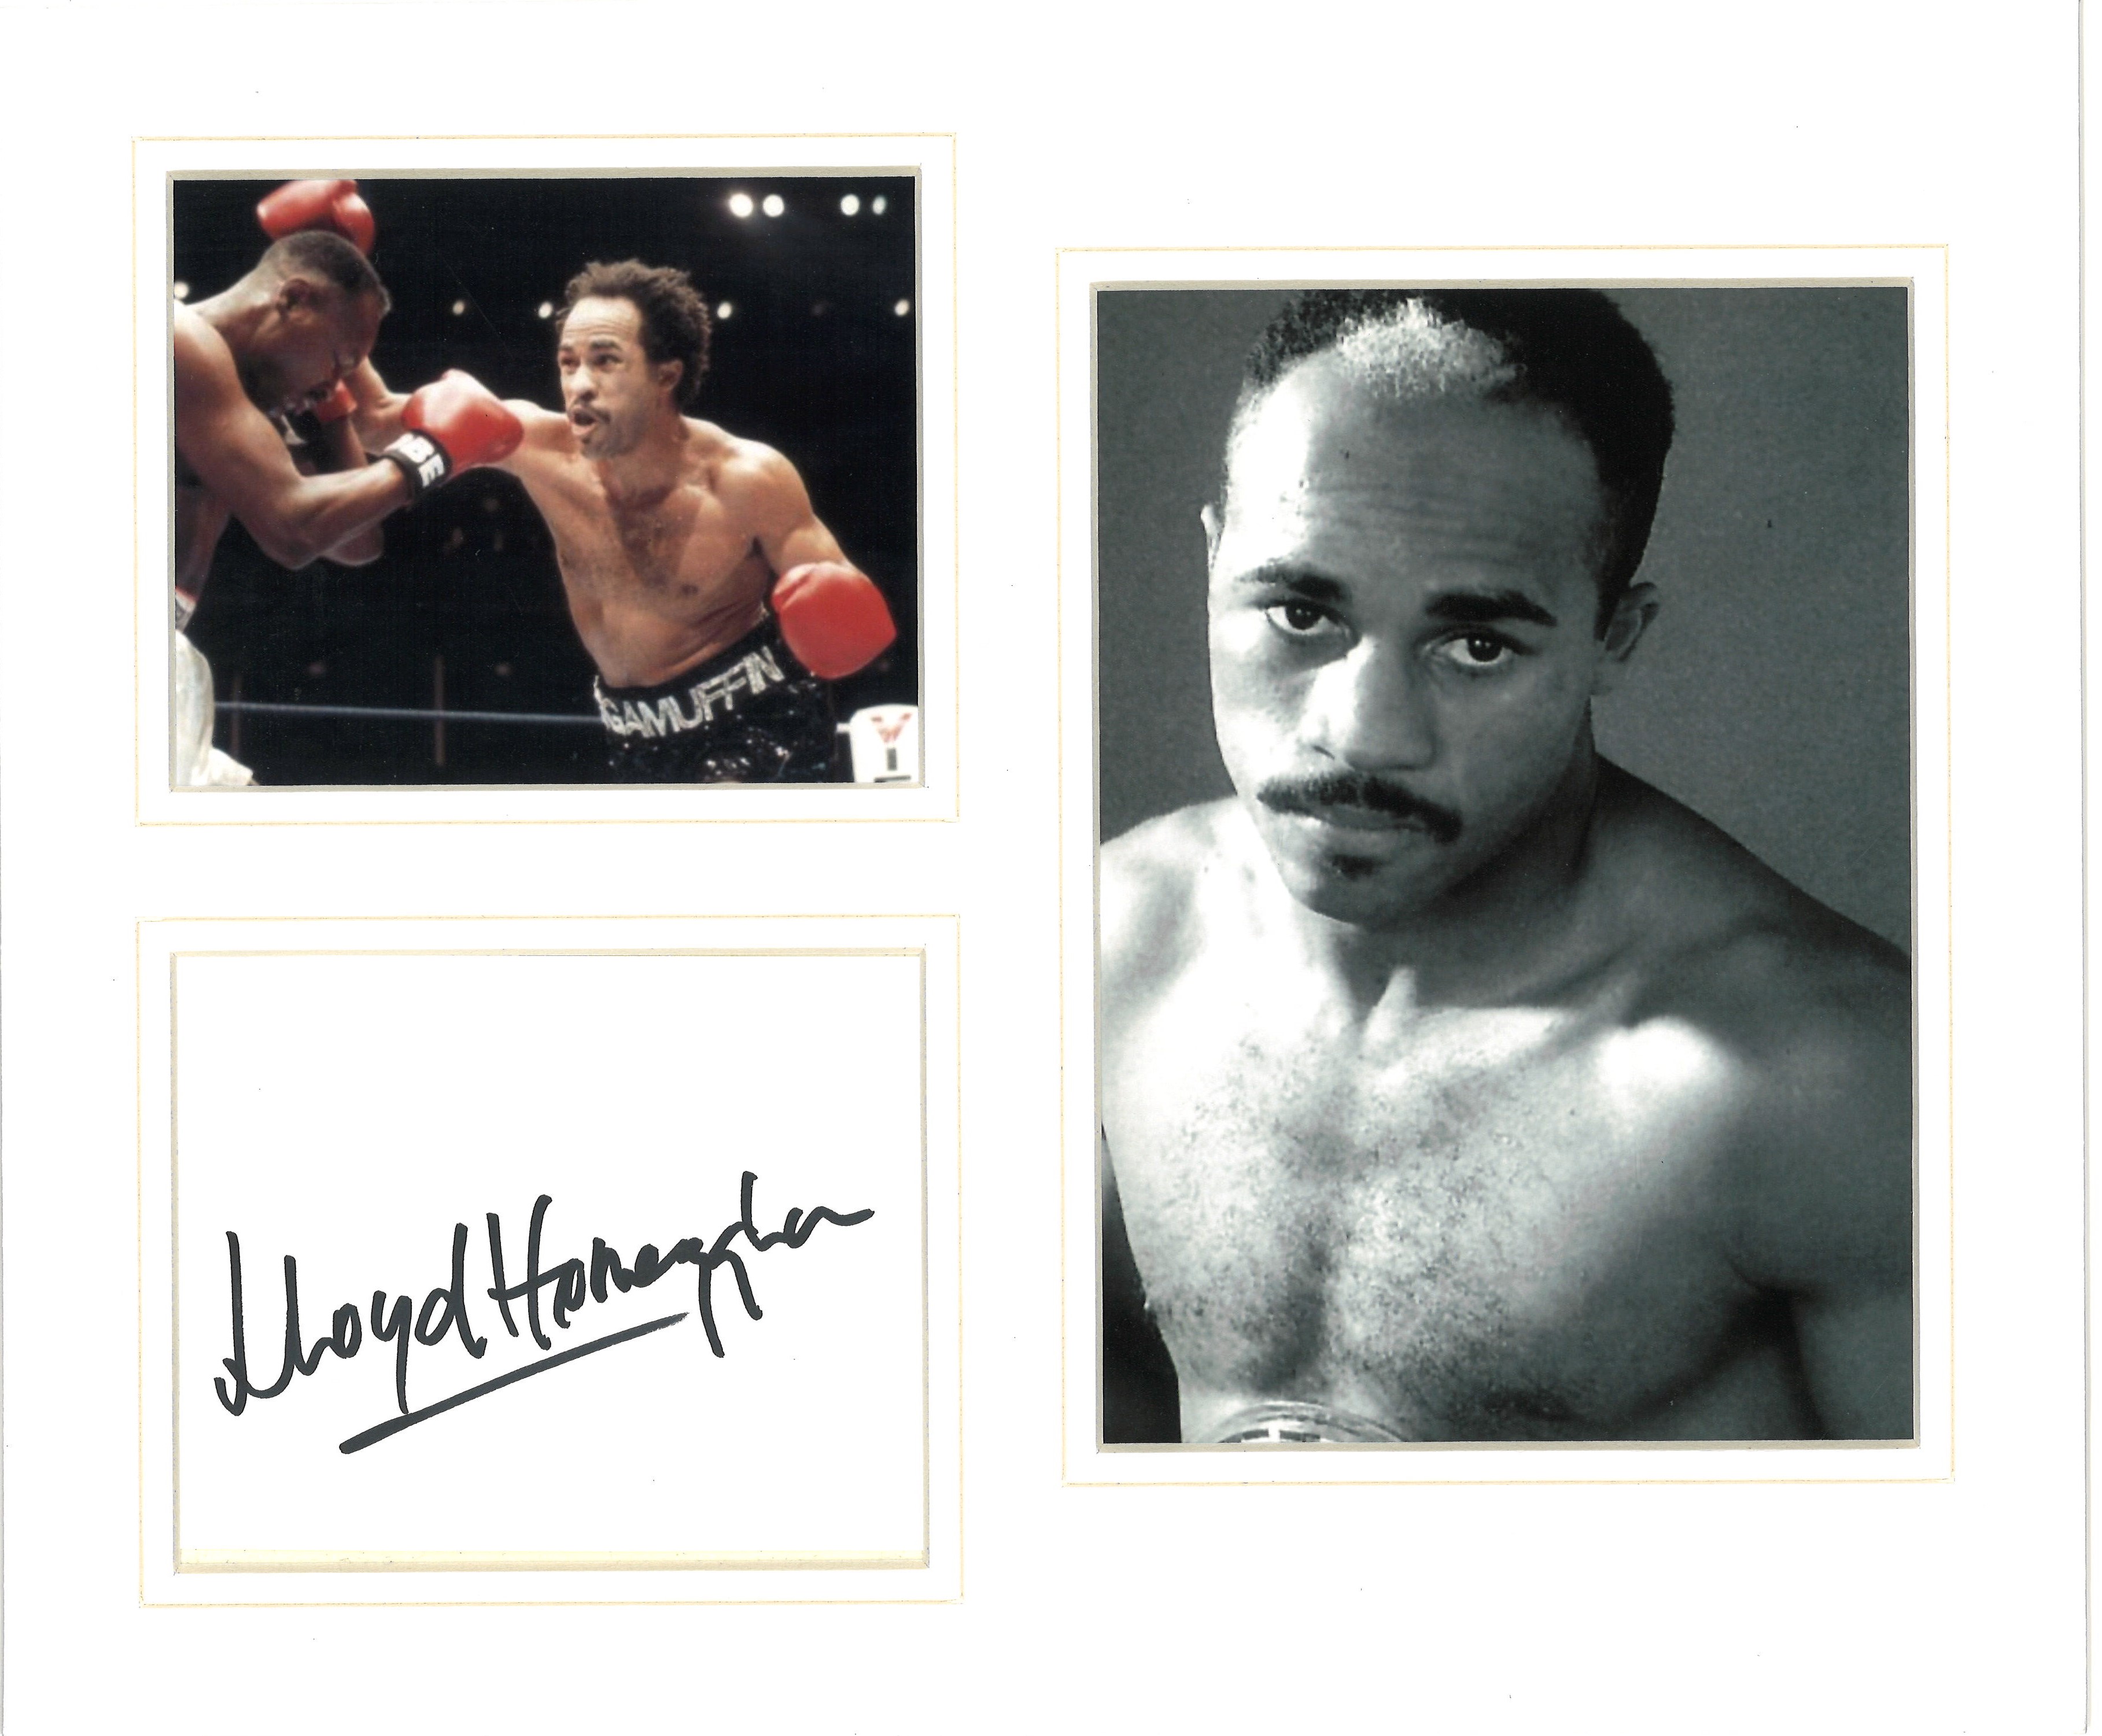 Boxing Lloyd Honeyghan 12x10 mounted signature piece includes two photos and a signed album page all